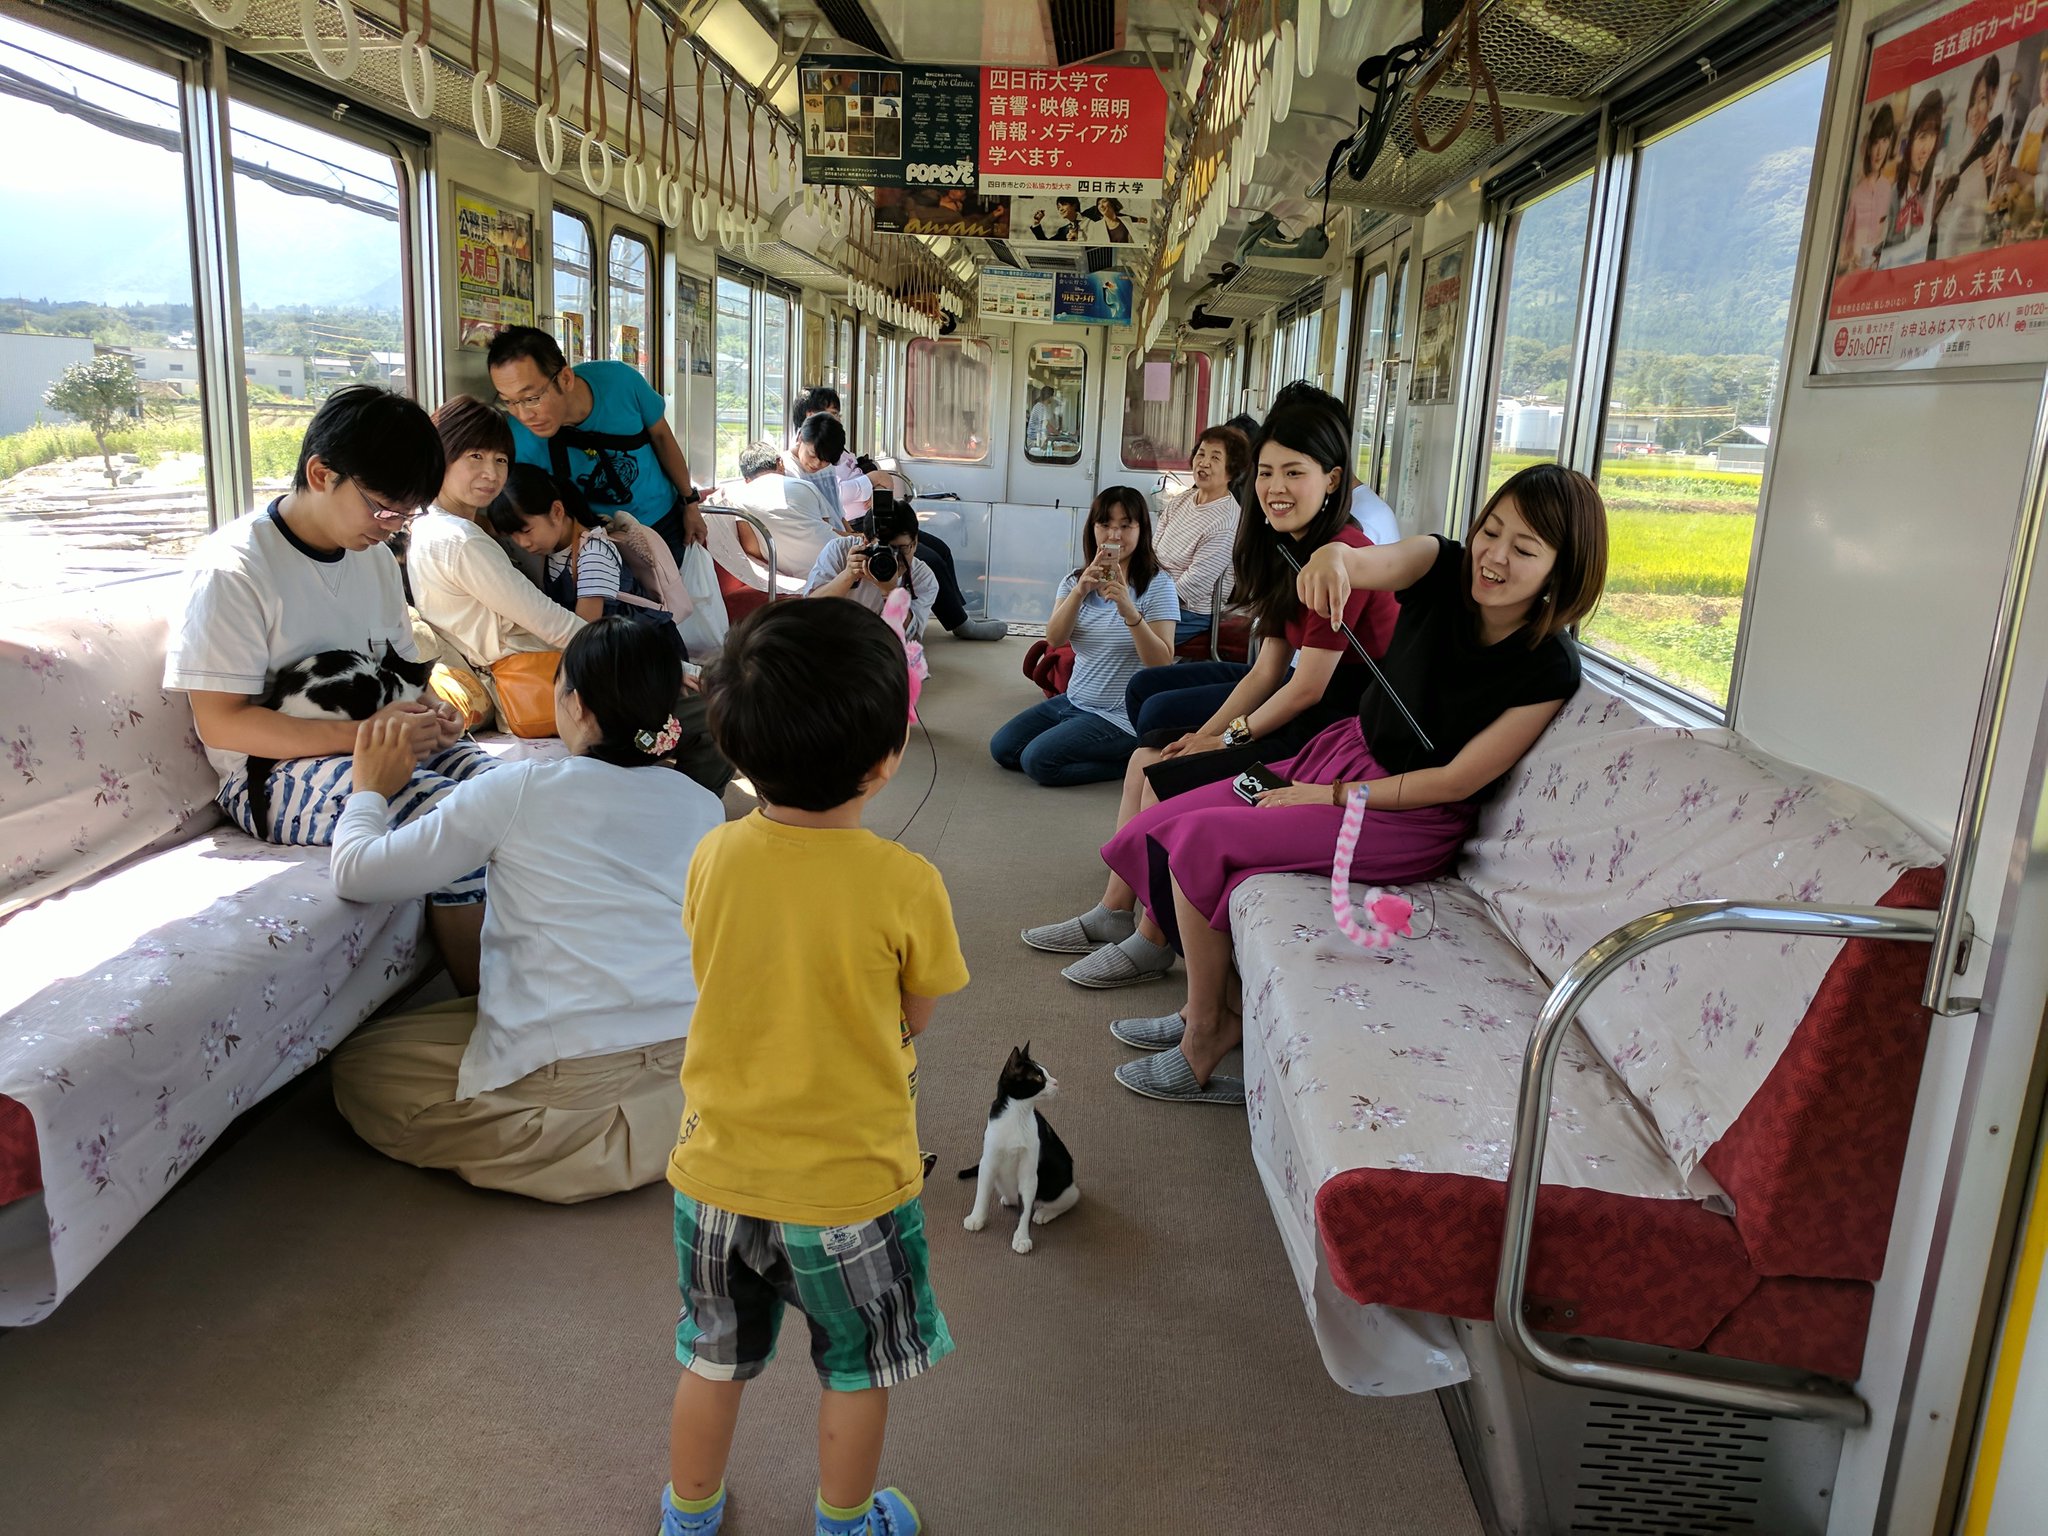 Japan opens its first cat train! 